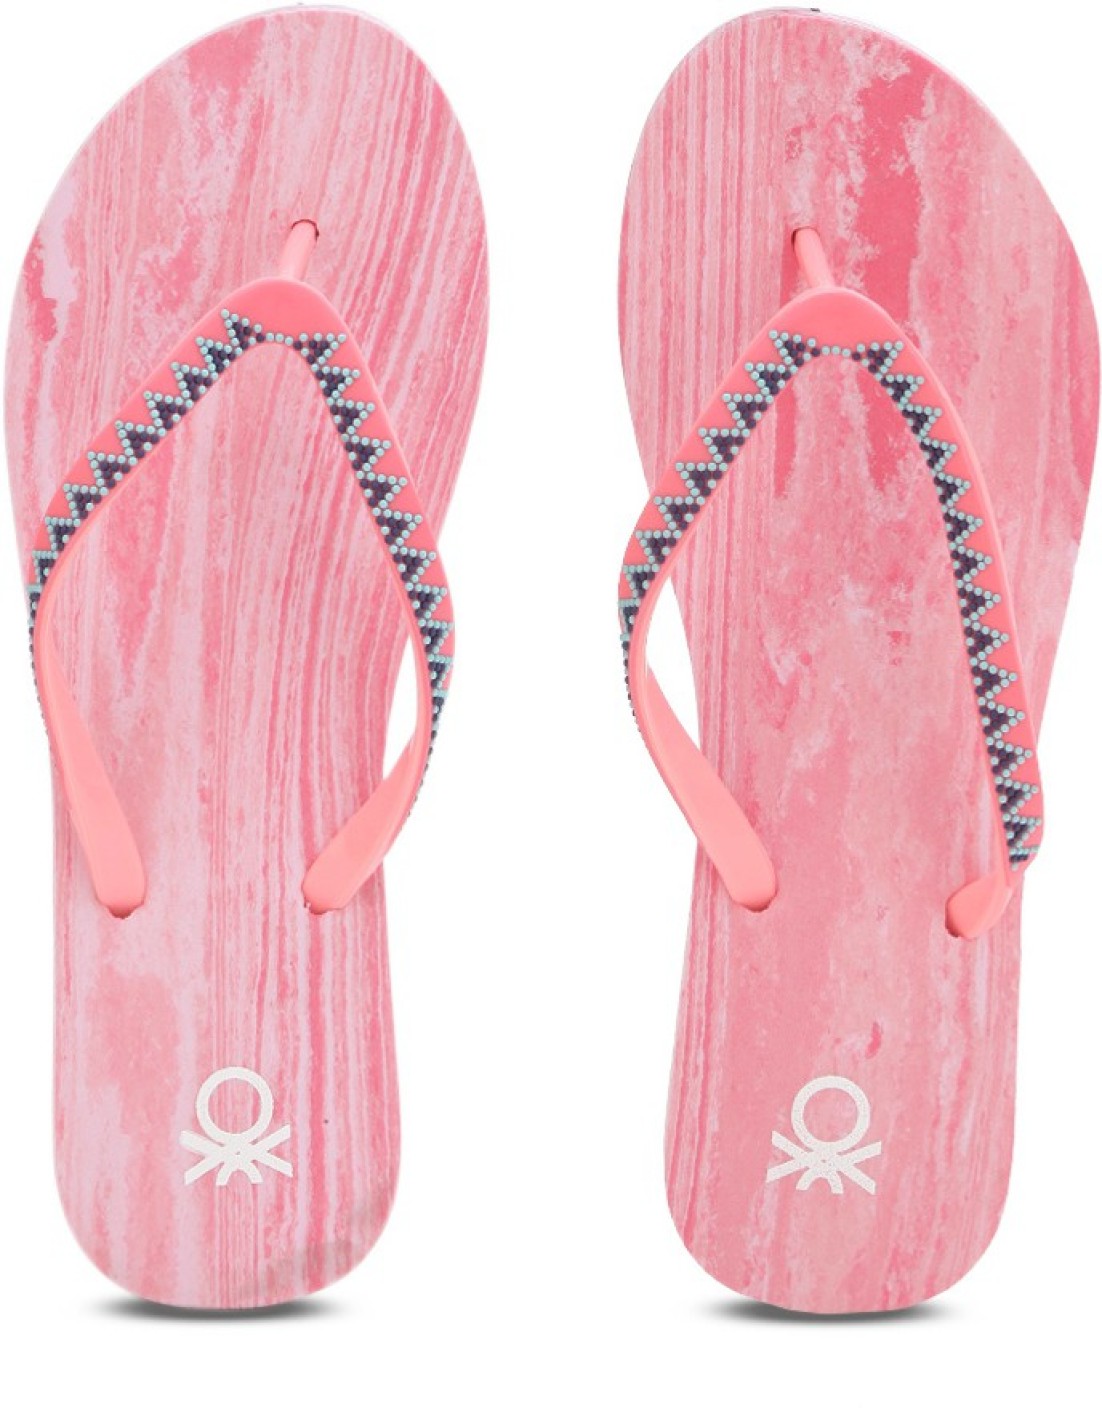 United Colors of Benetton UCB flip flops Slippers - Buy Pink Color ...